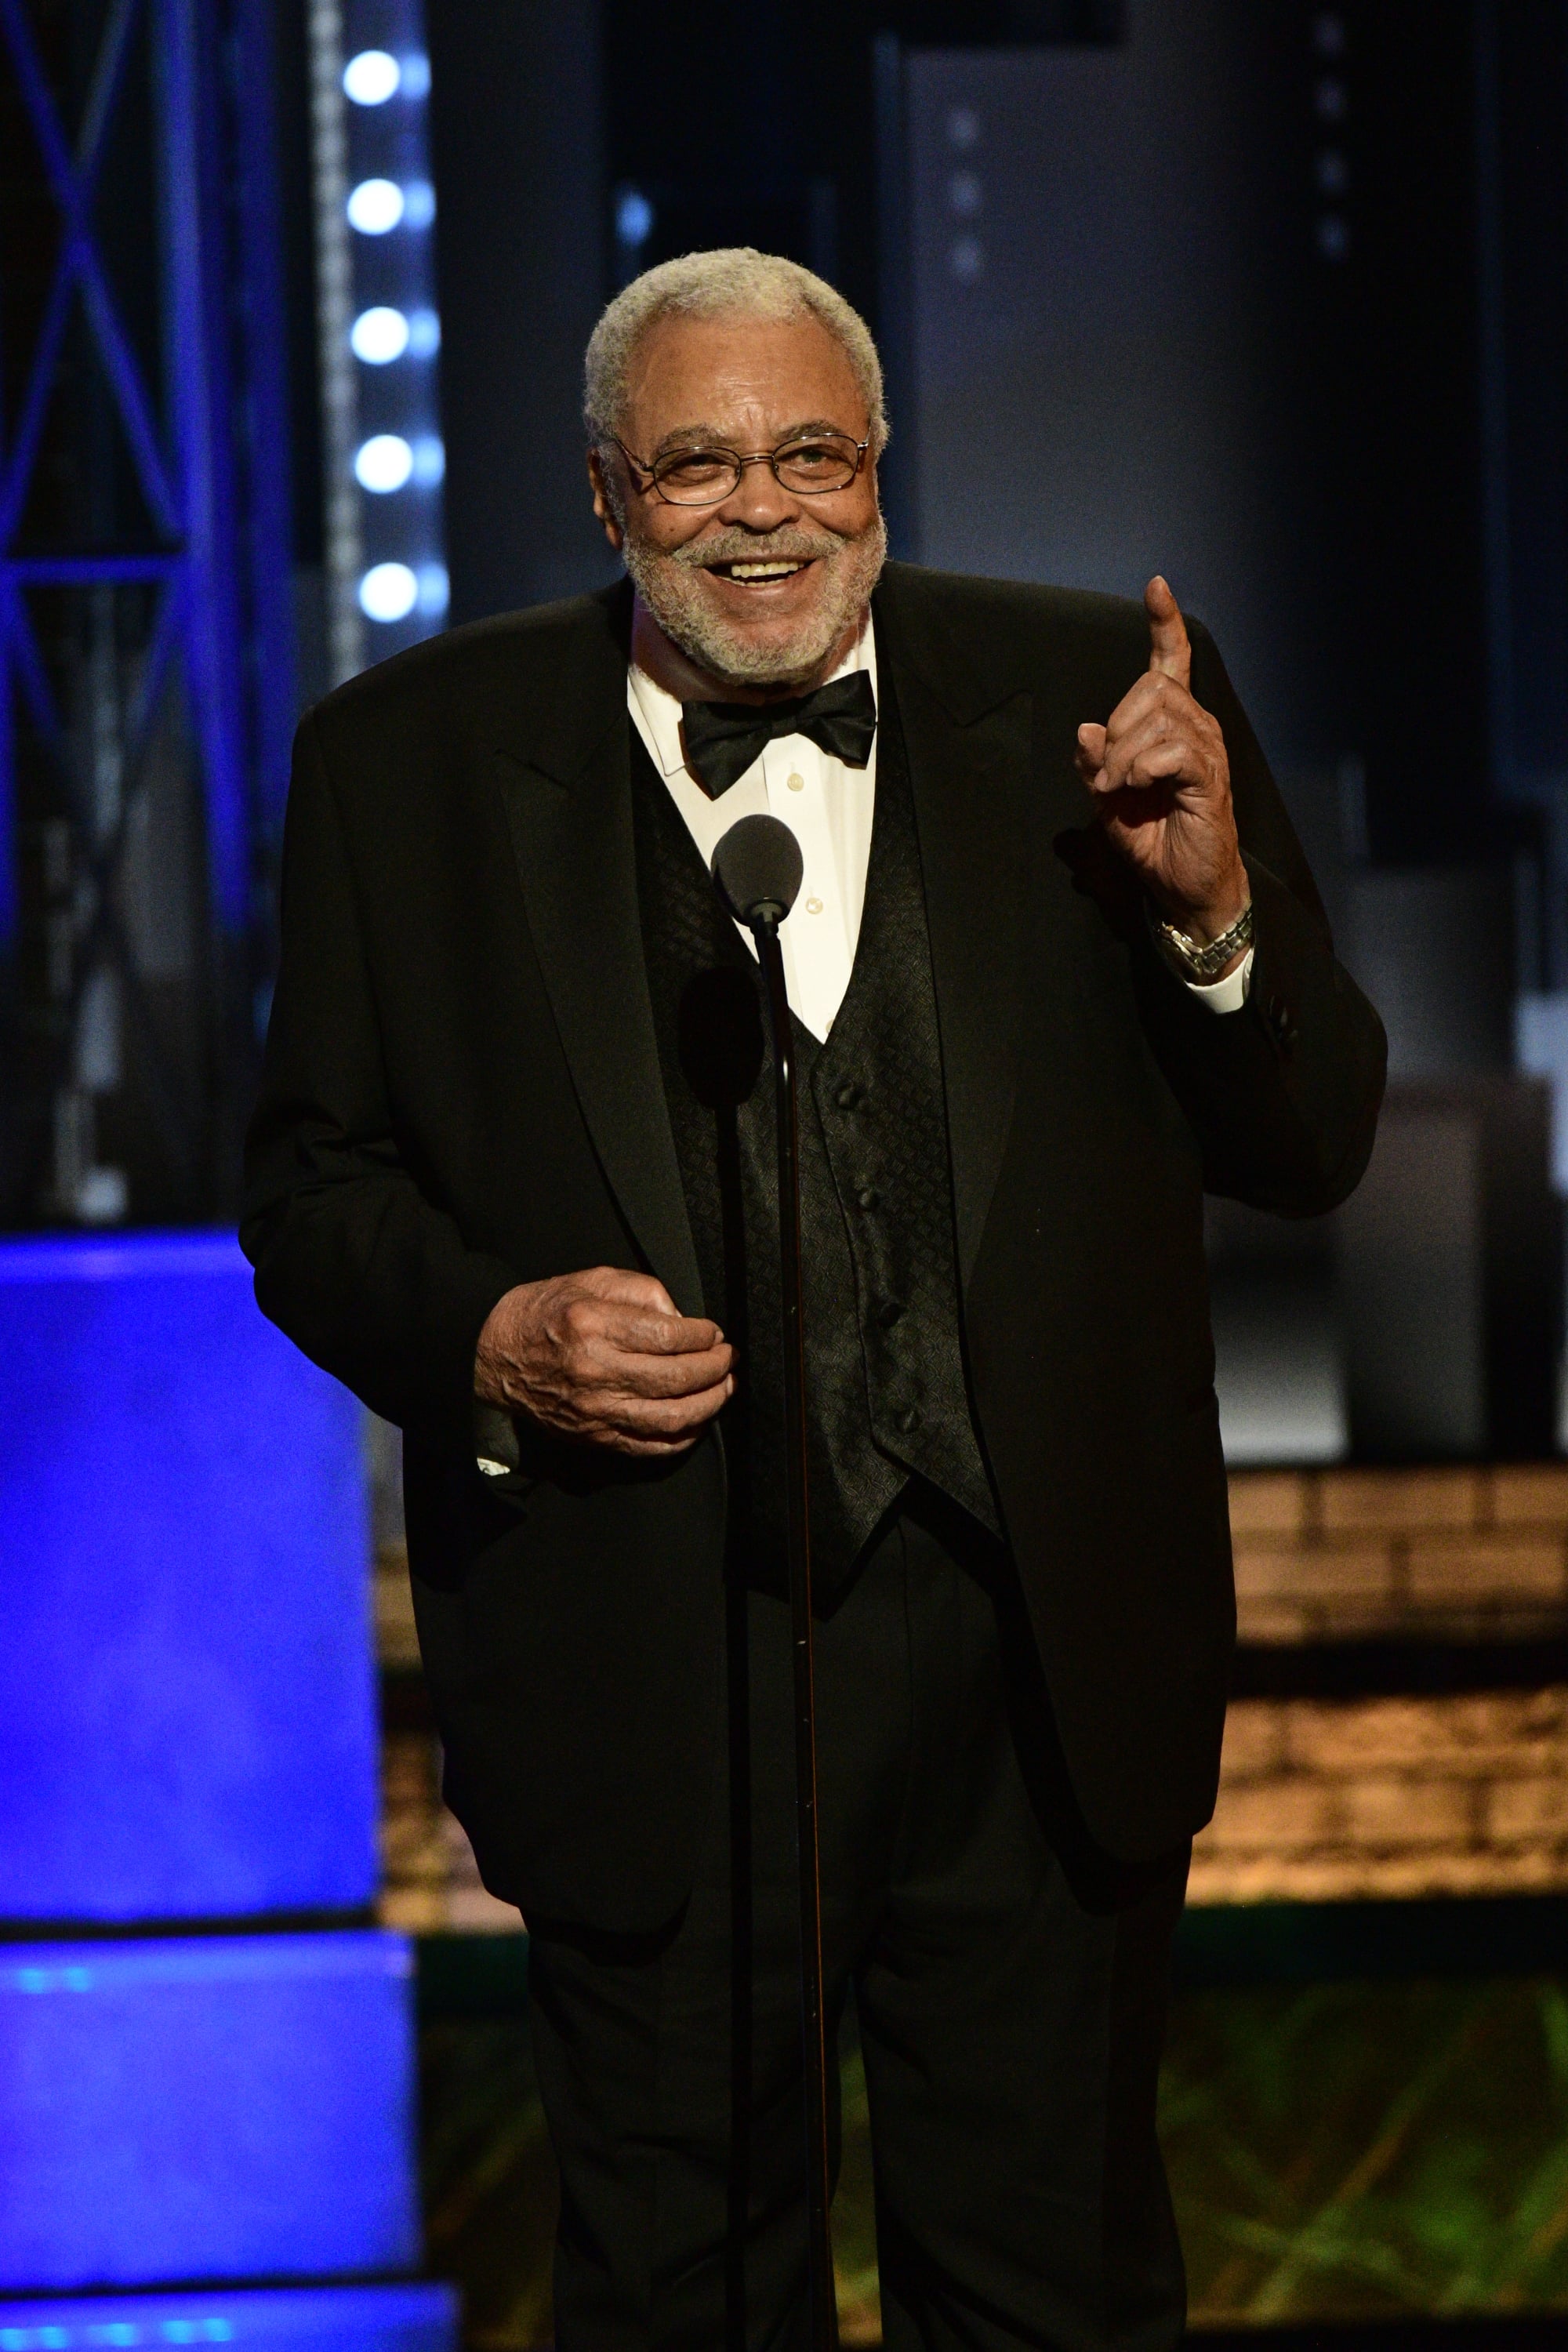 NEW YORK - JUNE 11: James Earl Jones, recipient of the Special Tony Award for Lifetime Achievement in the Theater at THE 71st ANNUAL TONY AWARDS broadcast live from Radio City Music Hall in New York City on Sunday, June 11, 2017 (8:00-11:00 PM, live ET/delayed PT) on the CBS Television Network. (Photo by John Paul Filo/CBS via Getty Images)